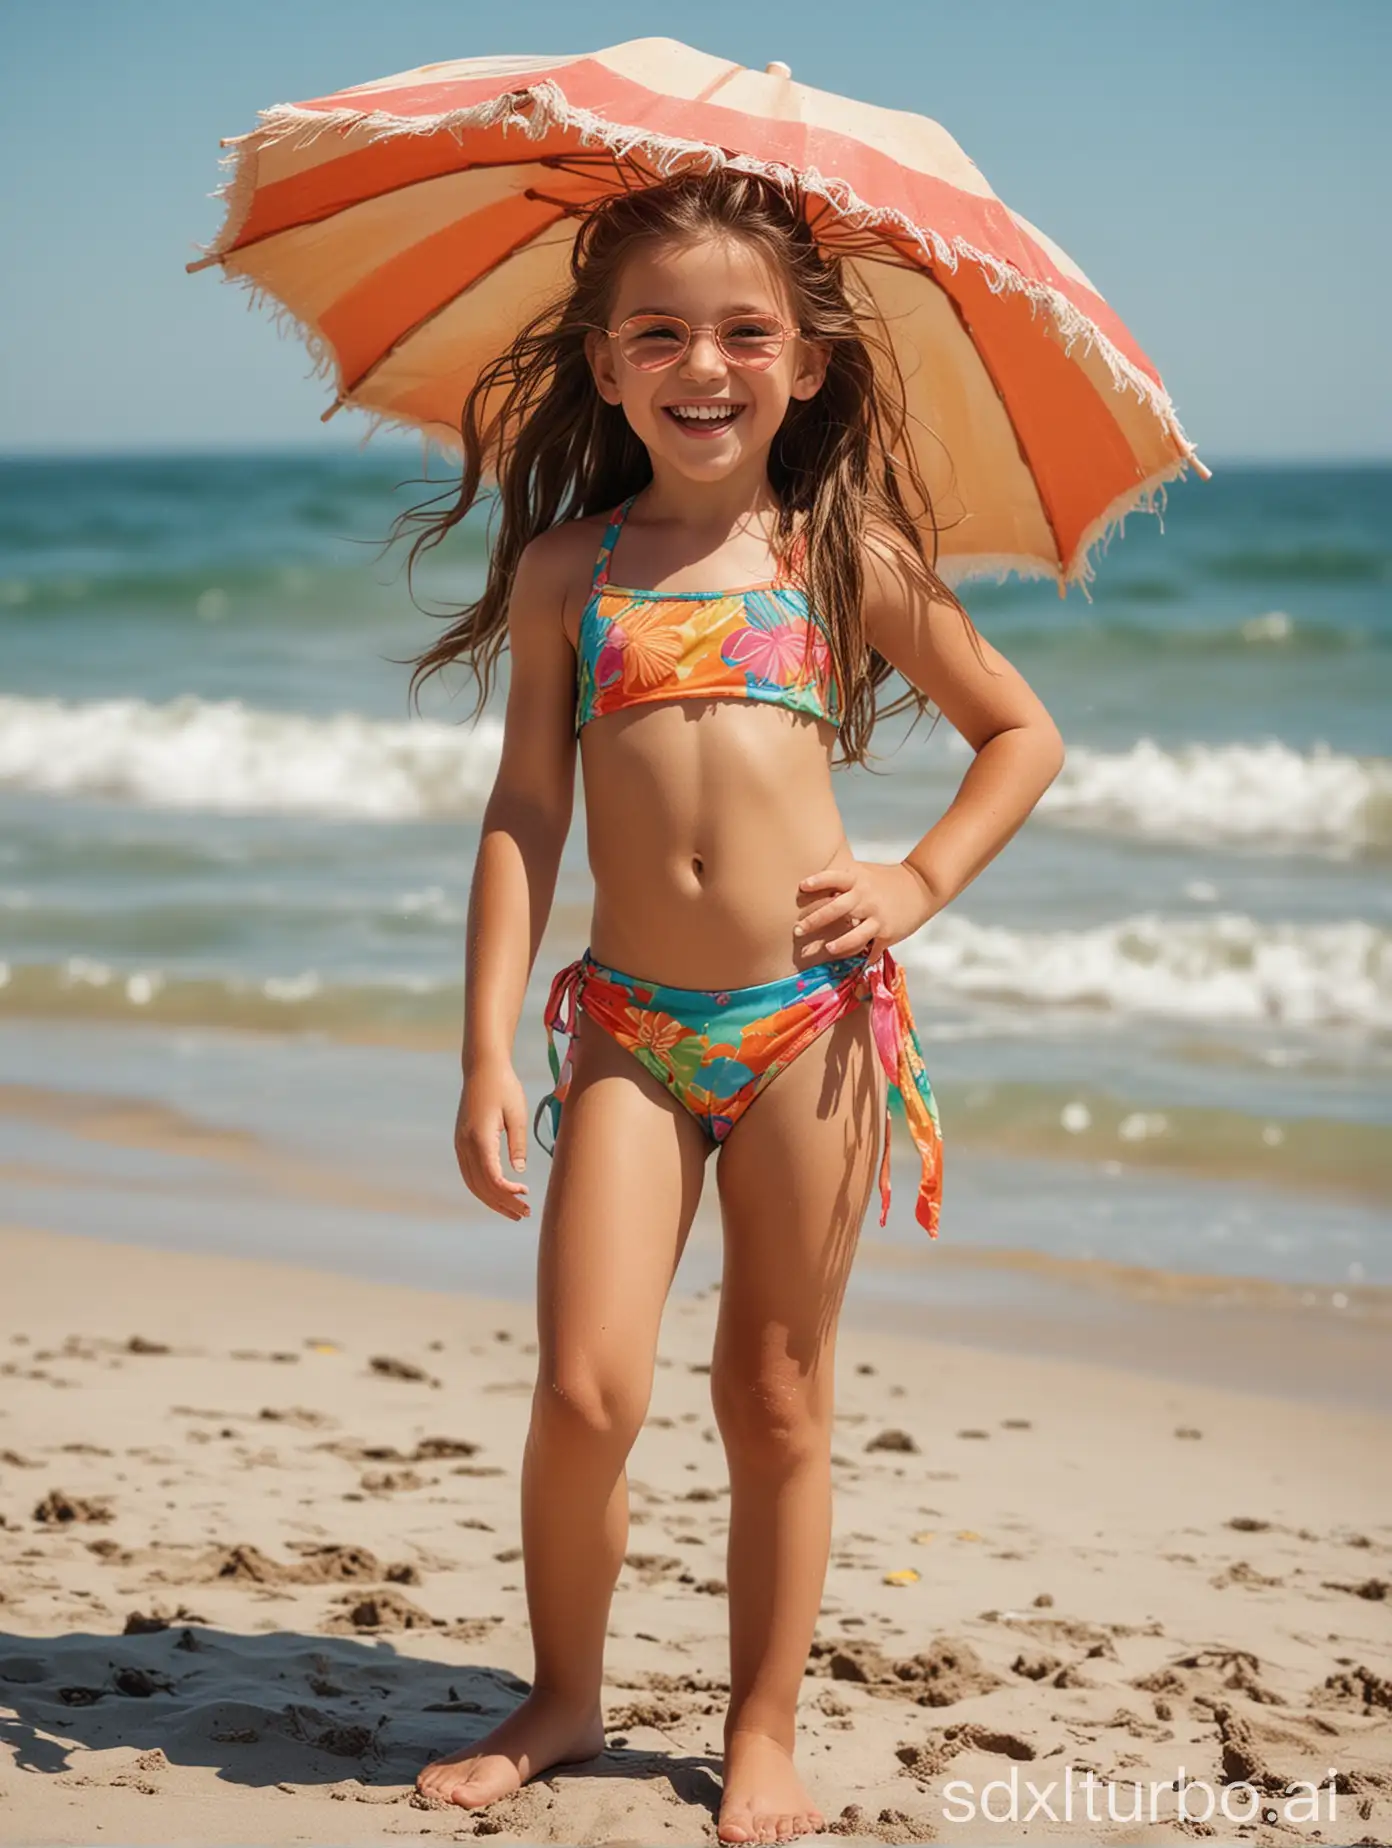 Subject: The main subject of the image is a 9-year-old girl.nSetting: The setting is a beach, indicated by the mention of sand and water.nBackground: The background could feature a sunny beach with waves gently crashing onto the shore, enhancing the summery vibe.nStyle/Coloring: The style could be vibrant and colorful, with bright hues to capture the lively atmosphere of a beach day.nAction: The girl is smiling, indicating joy and contentment. She might be posing confidently to showcase her muscular abs, suggesting pride or confidence.nItems: The girl is wearing a tiny swimsuit, emphasizing her physique. Perhaps there are beach toys or umbrellas in the background to add detail to the scene.nCostume/Appearance: The girl has long hair and wears a swimsuit, typical attire for a beach day. Her smile and confidence could be highlighted in her facial expression and posture.nAccessories: Accessories might include sunglasses, sunscreen, or a beach towel nearby, adding realism to the beach setting.